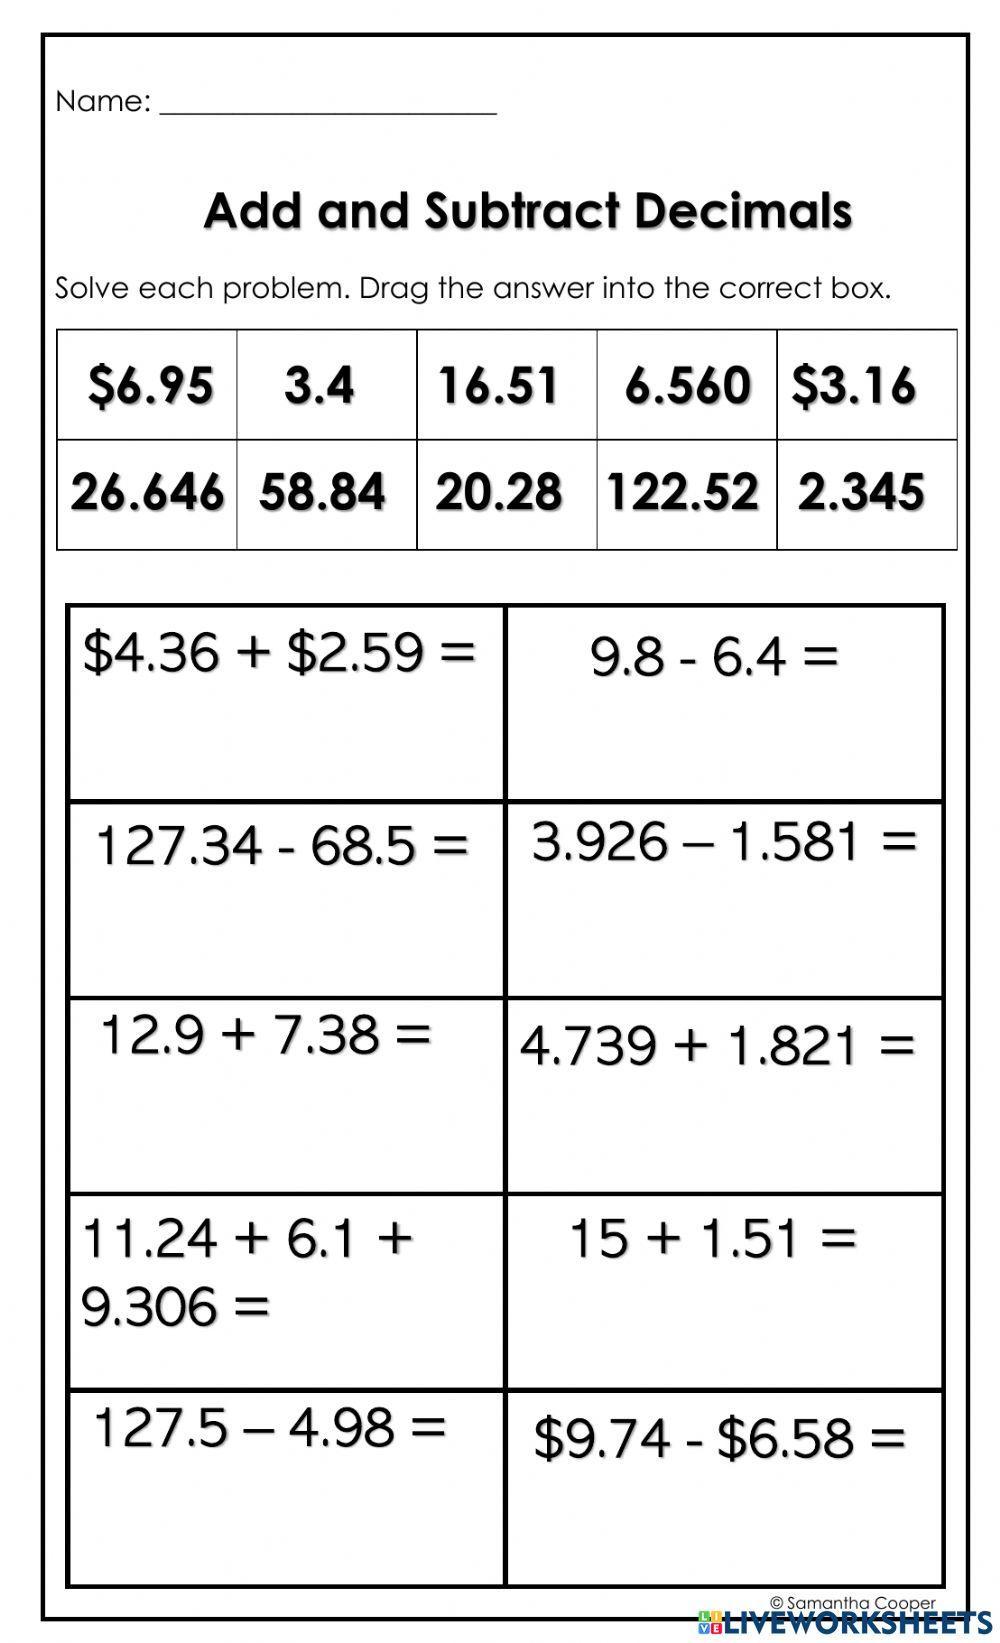 Add and Subtract Decimals